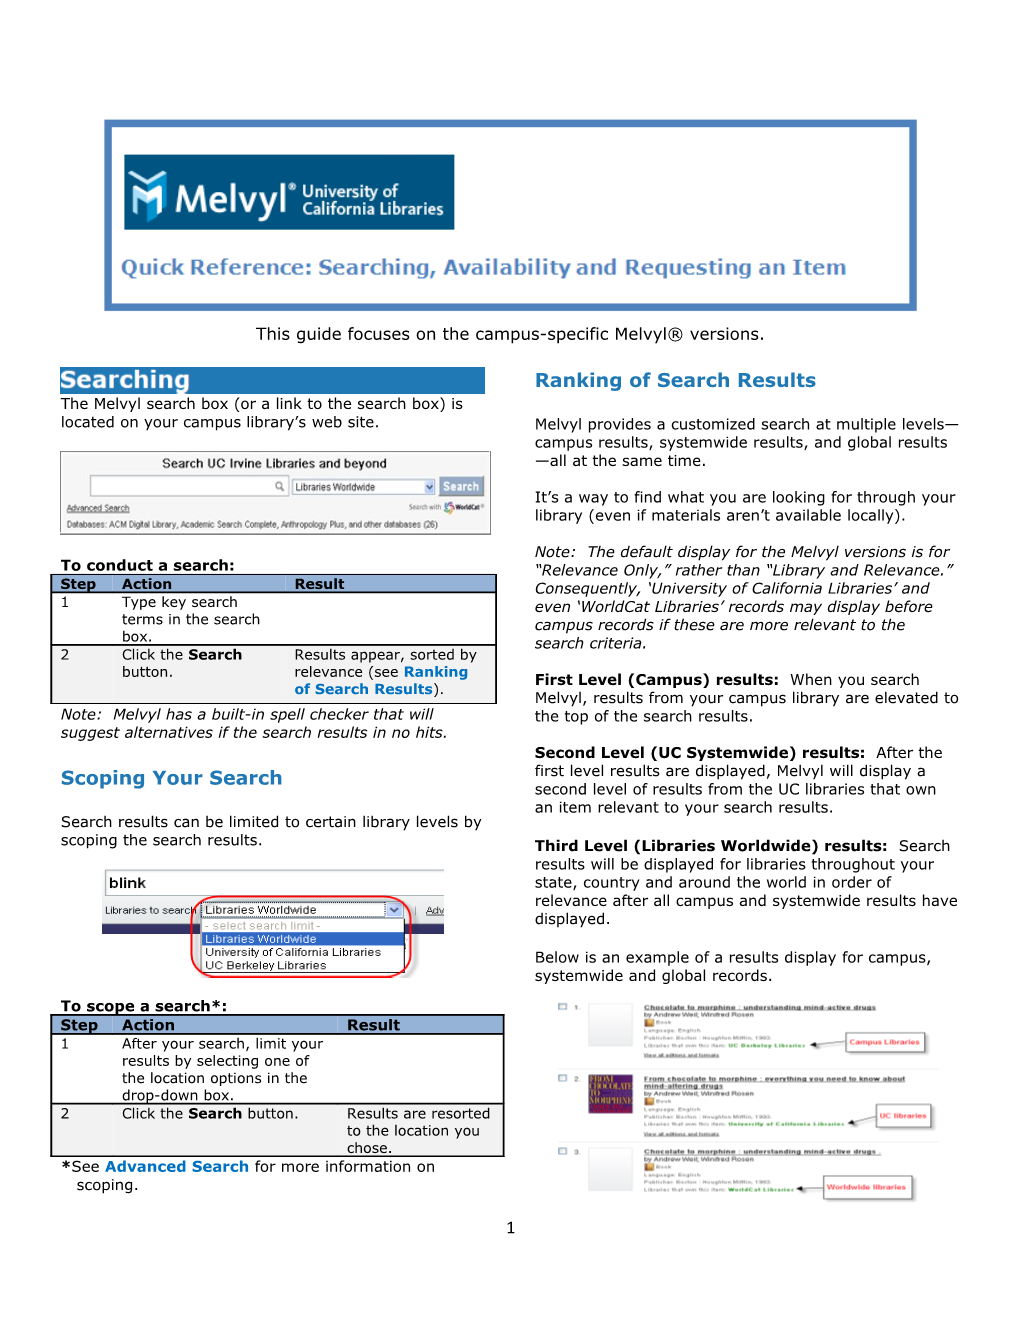 This Guide Focuses on the Campus-Specific Melvyl Versions